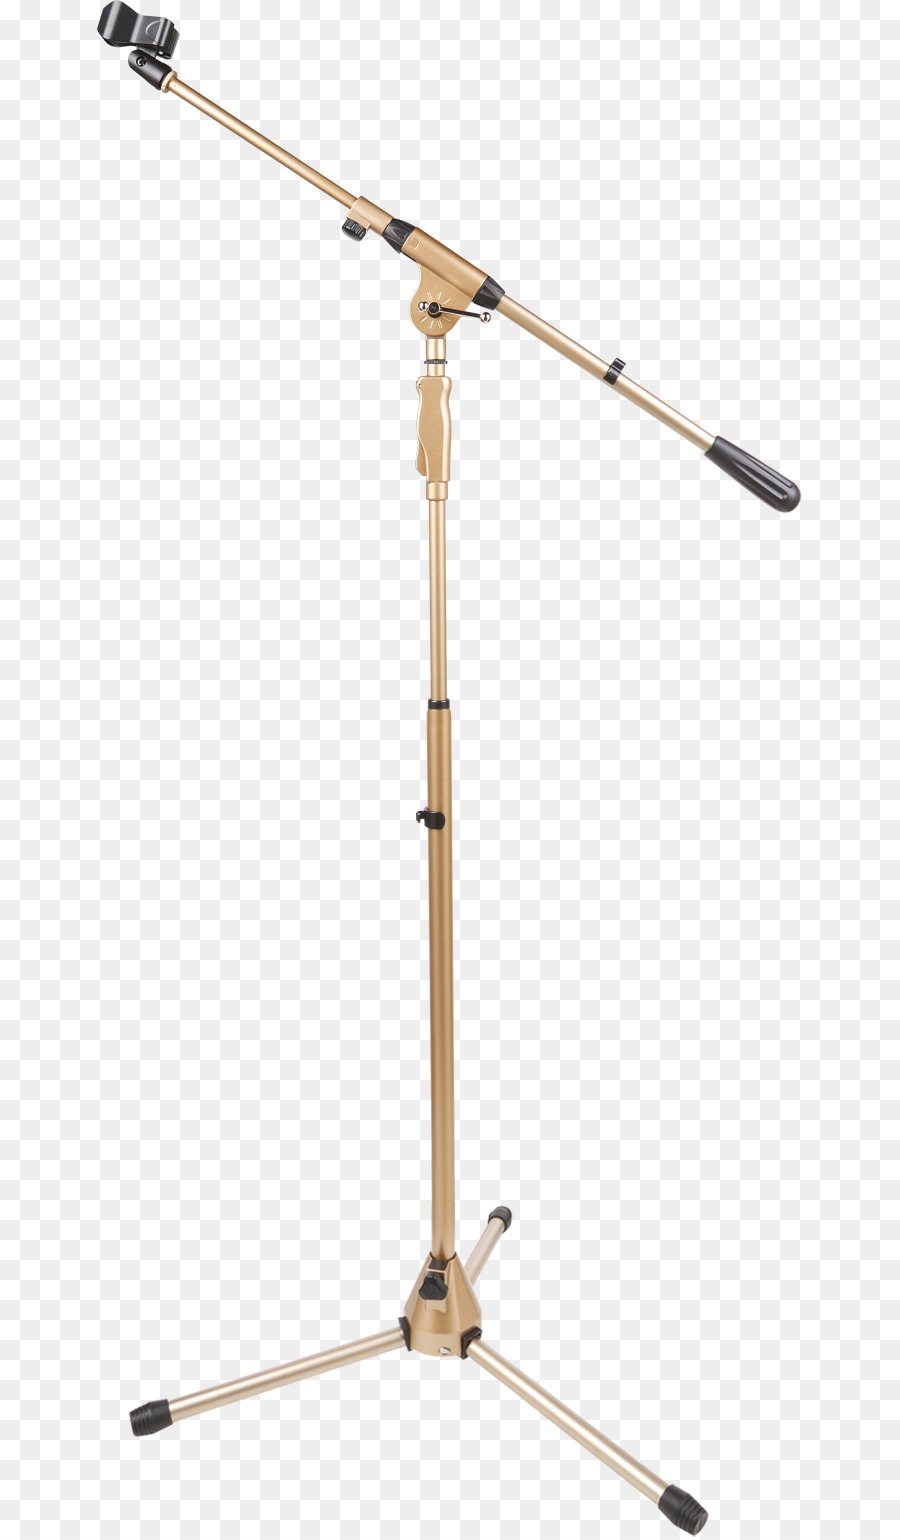 Microphone Stands Loudspeaker Electronics Dubbing - microphone png download - 706*1537 - Free Transparent Microphone png Download.